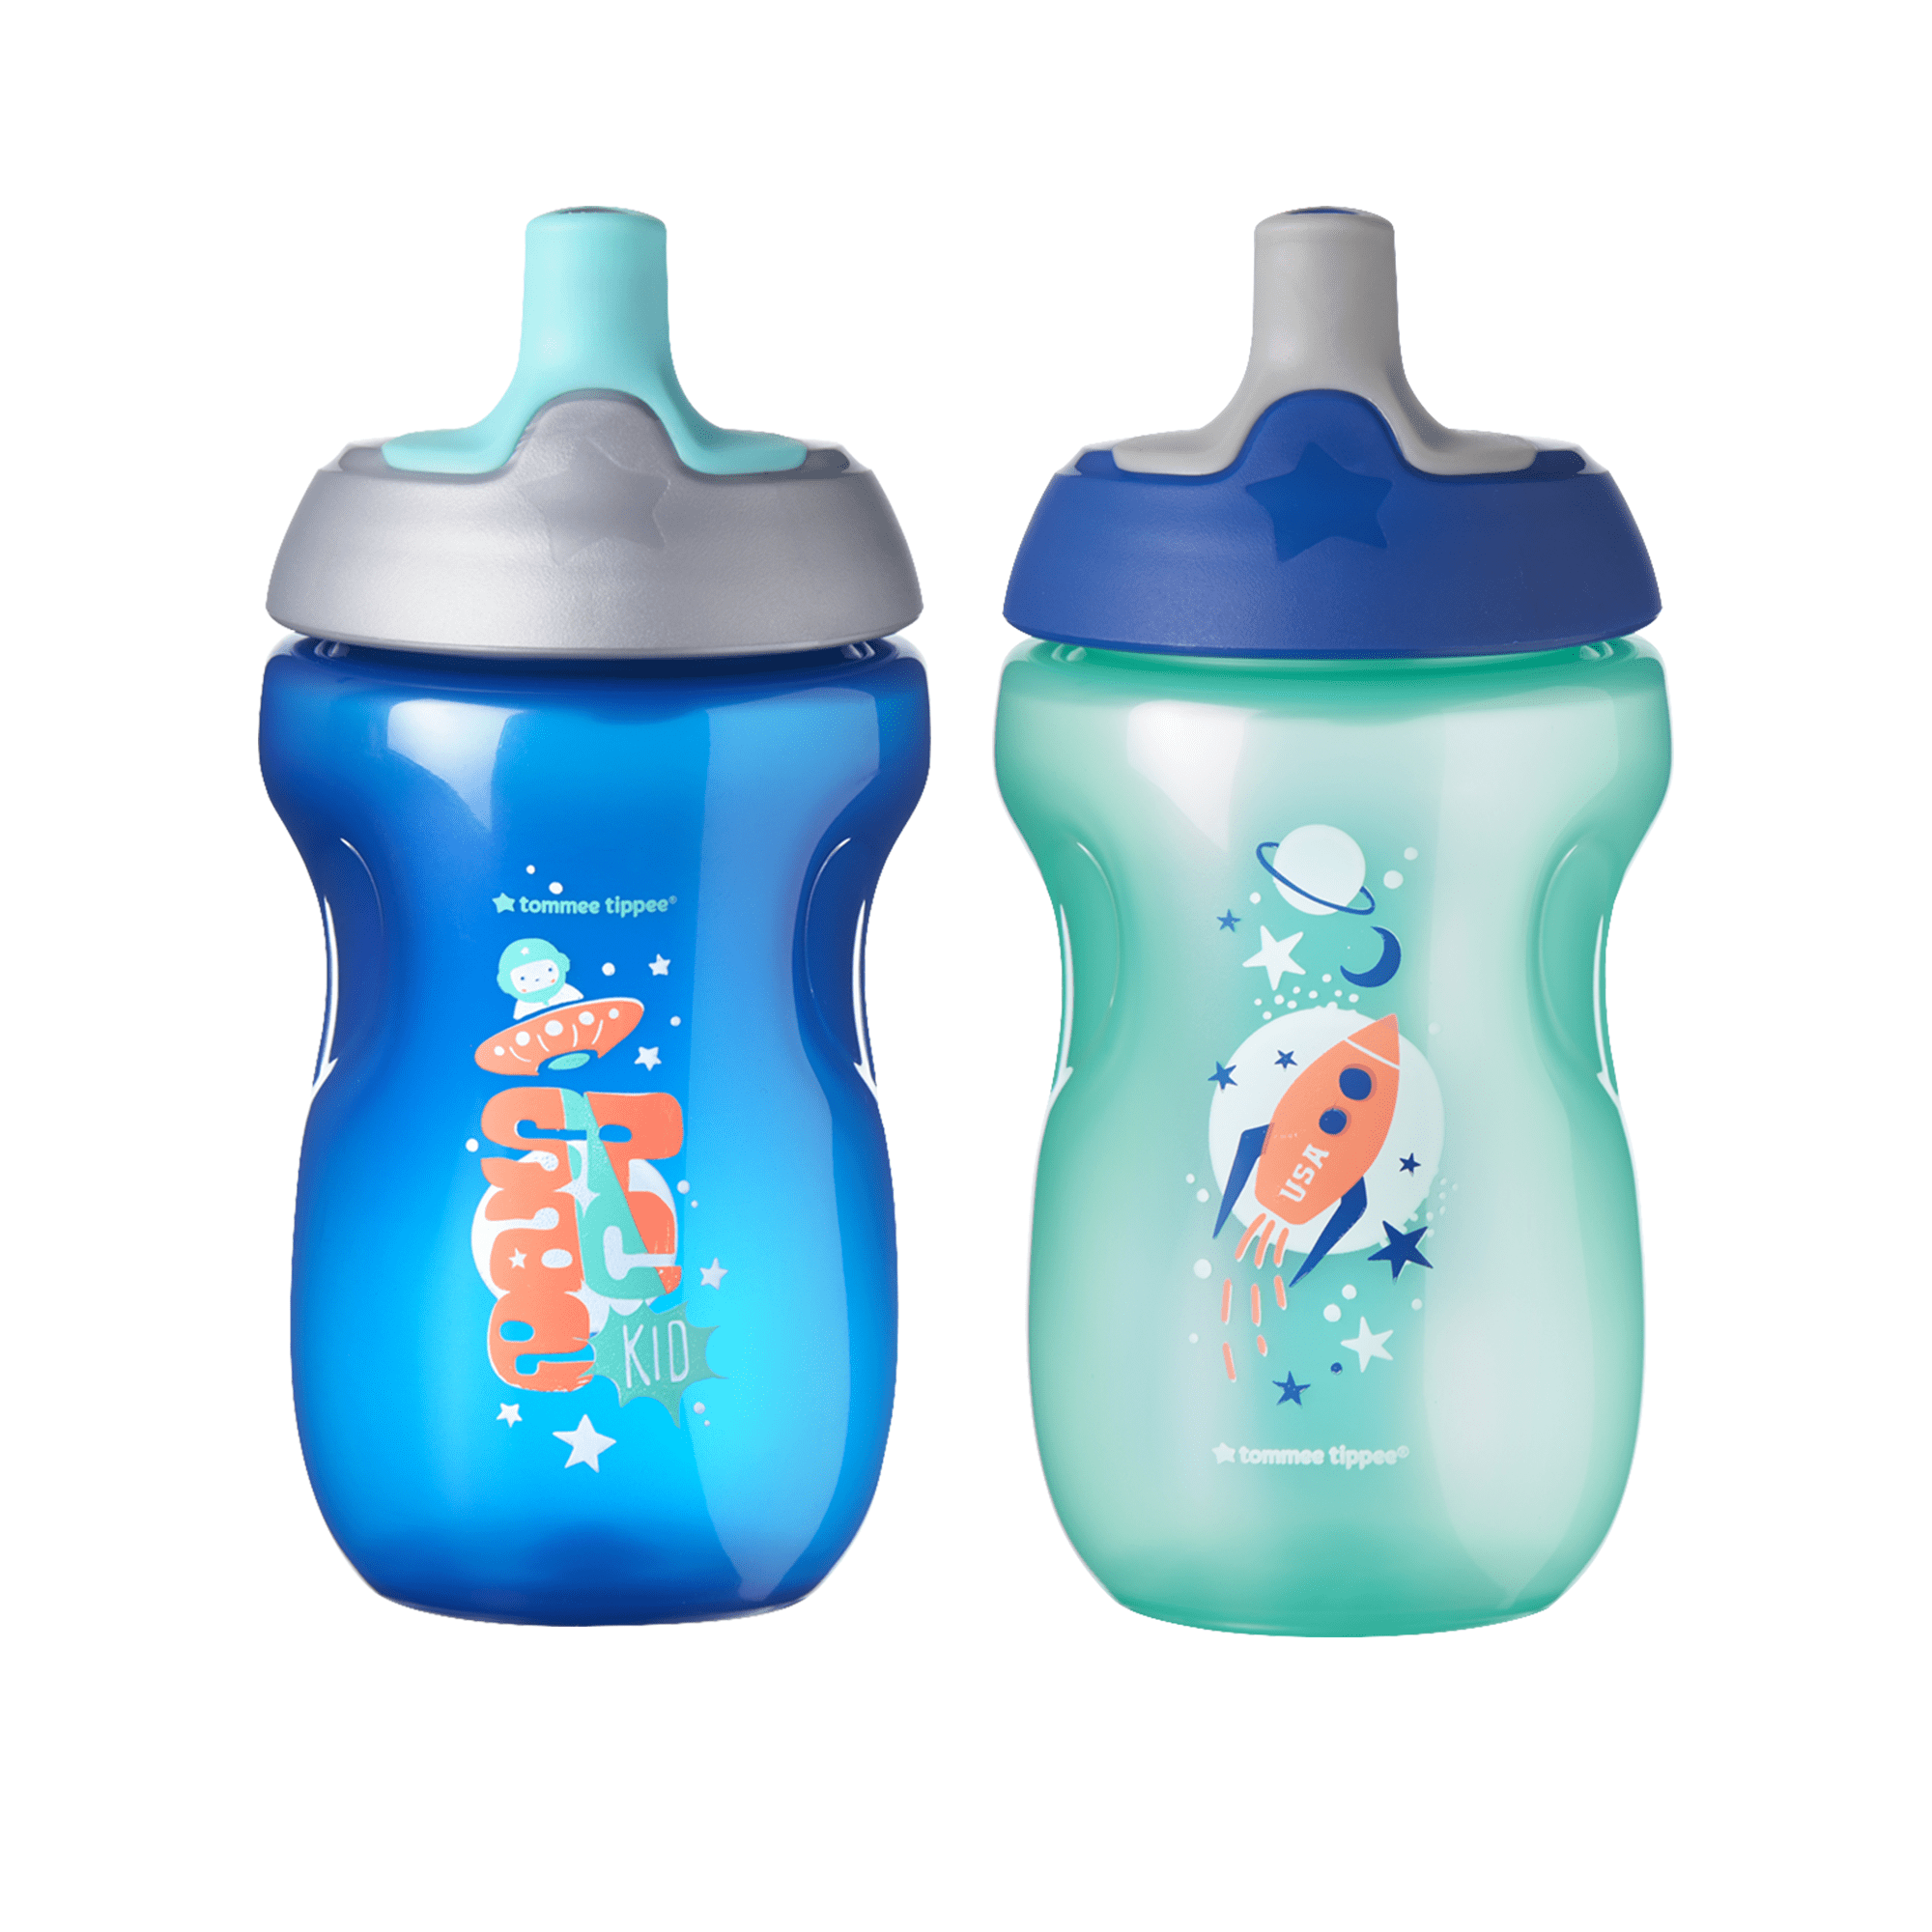 Free Shipping Tommee Tippee 2 sportee bottles Designs Vary New 